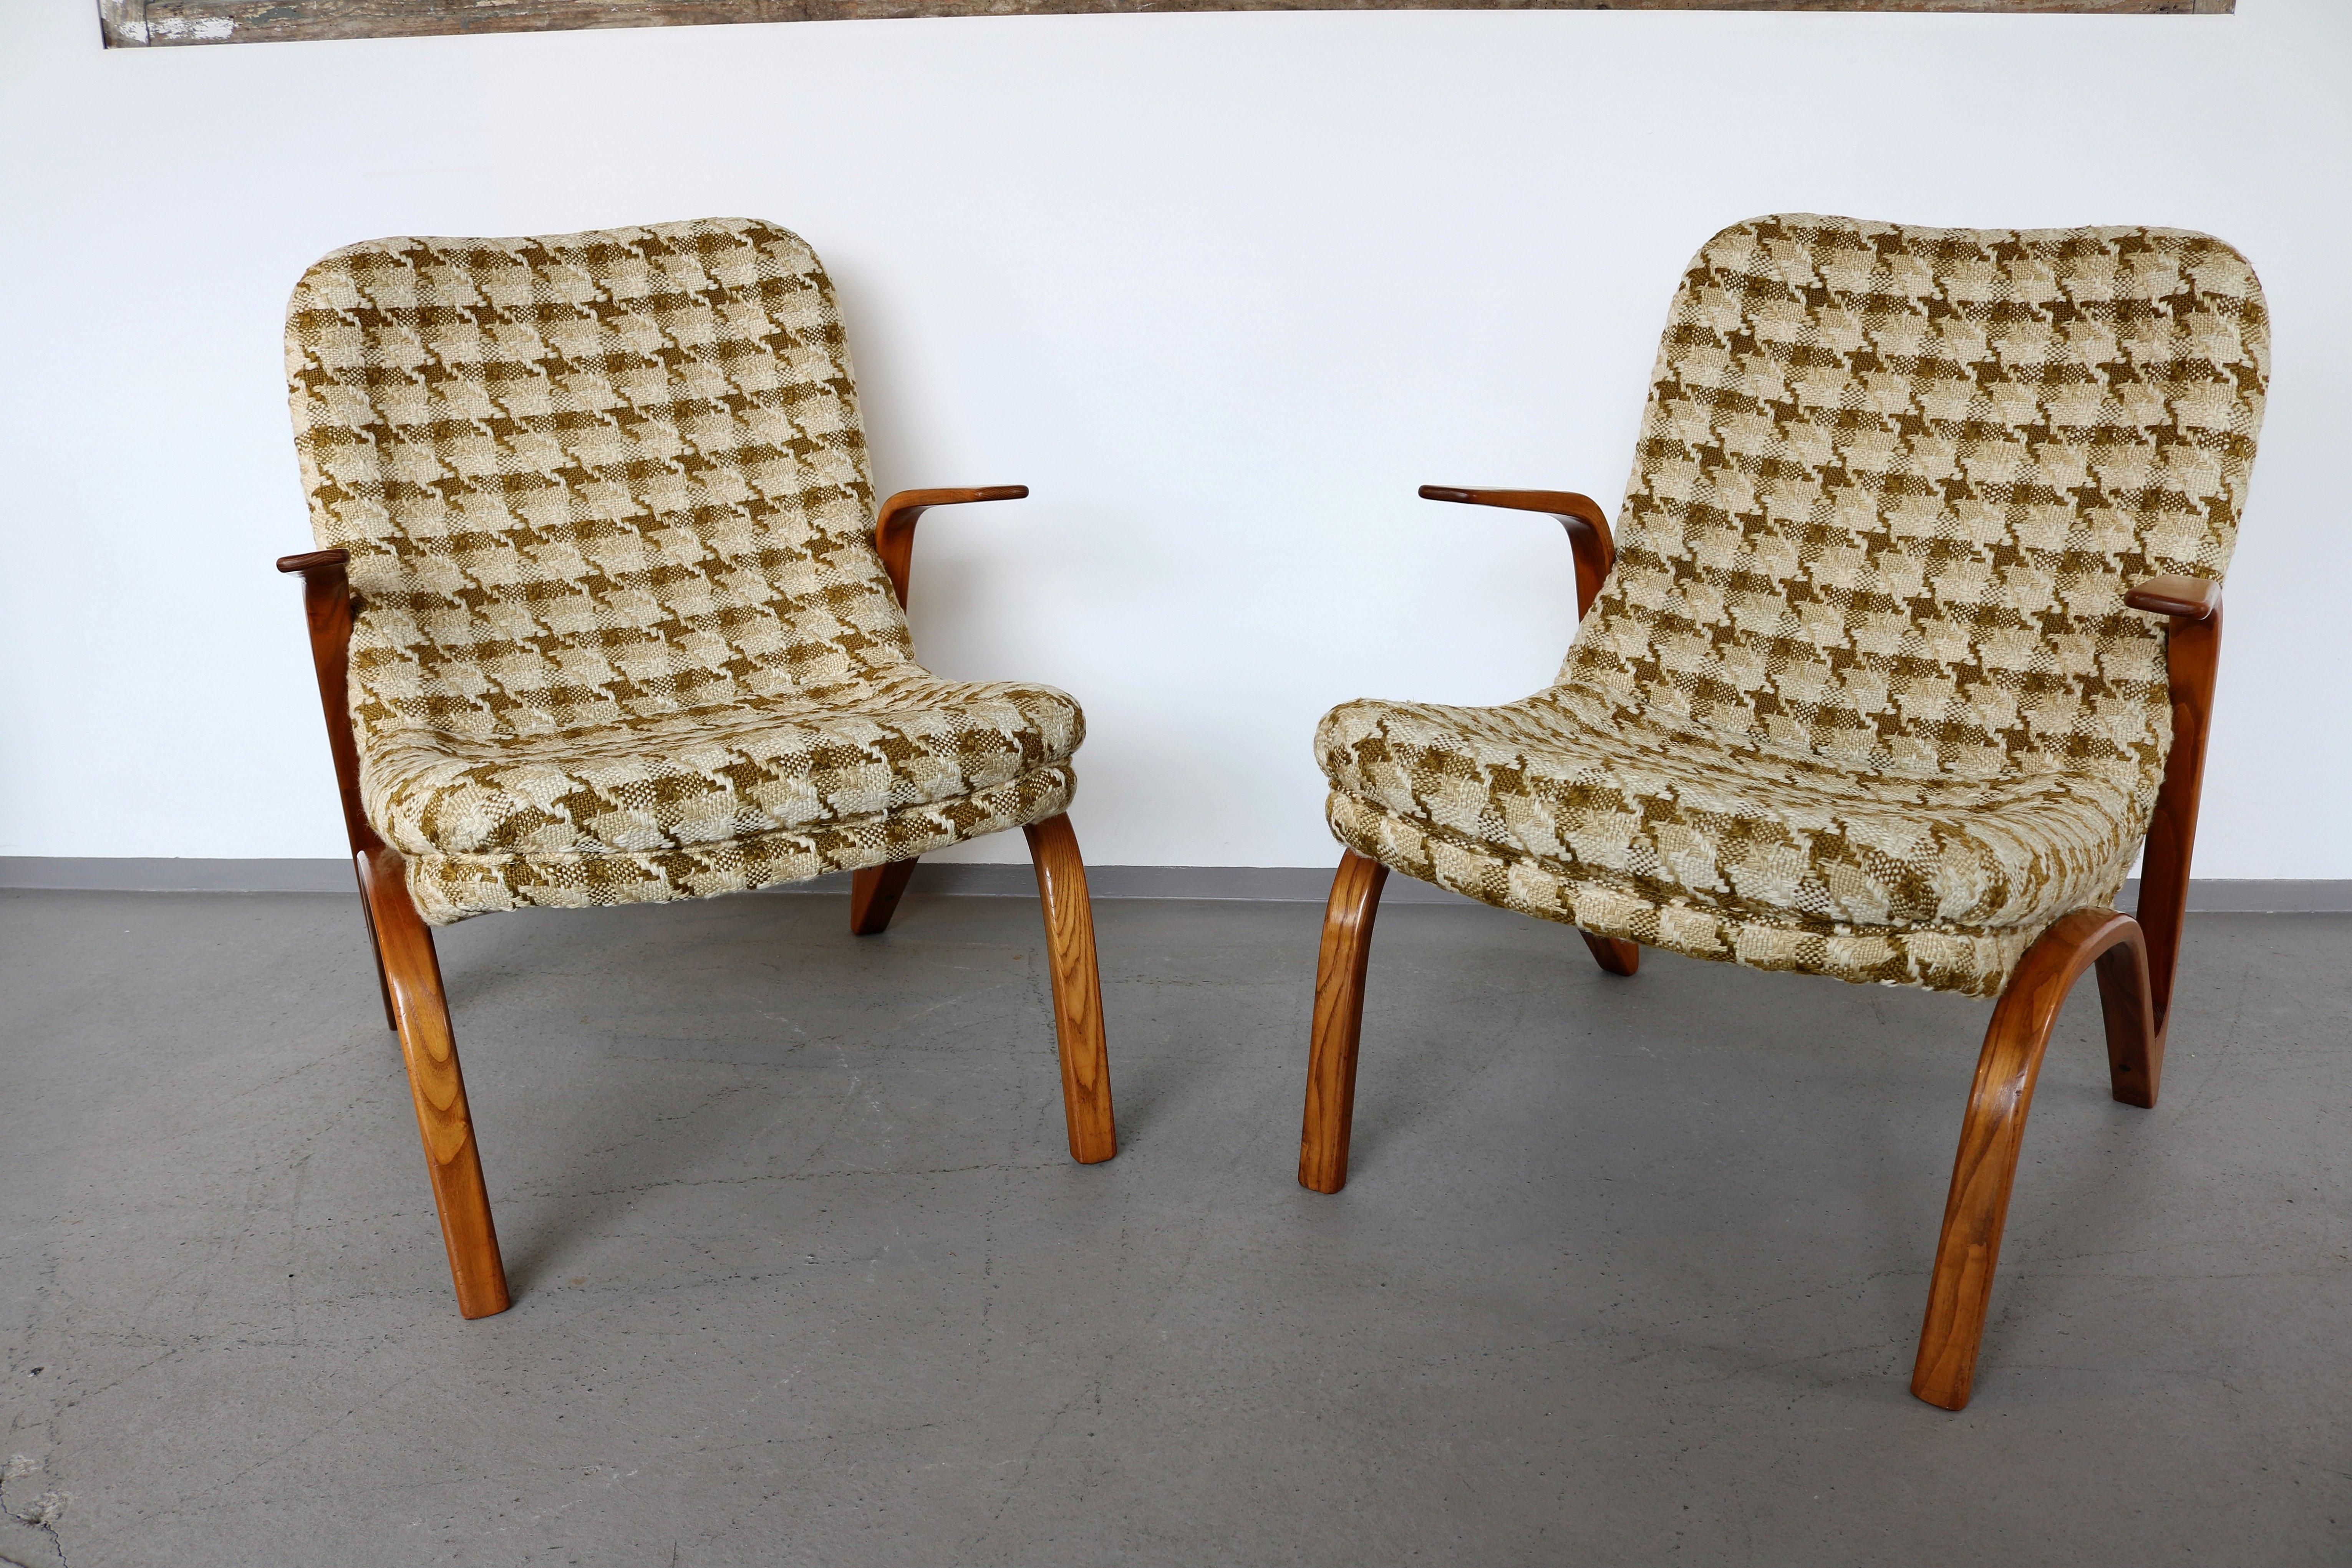 Set of 2 beautiful shaped lounge chairs. The Konkav chairs designed by Paul Bode for Deutsche Federholzgesellschaft in the 1950s are in original condition. The Bentwood is complete and in very good original condition, also the fabric. Very